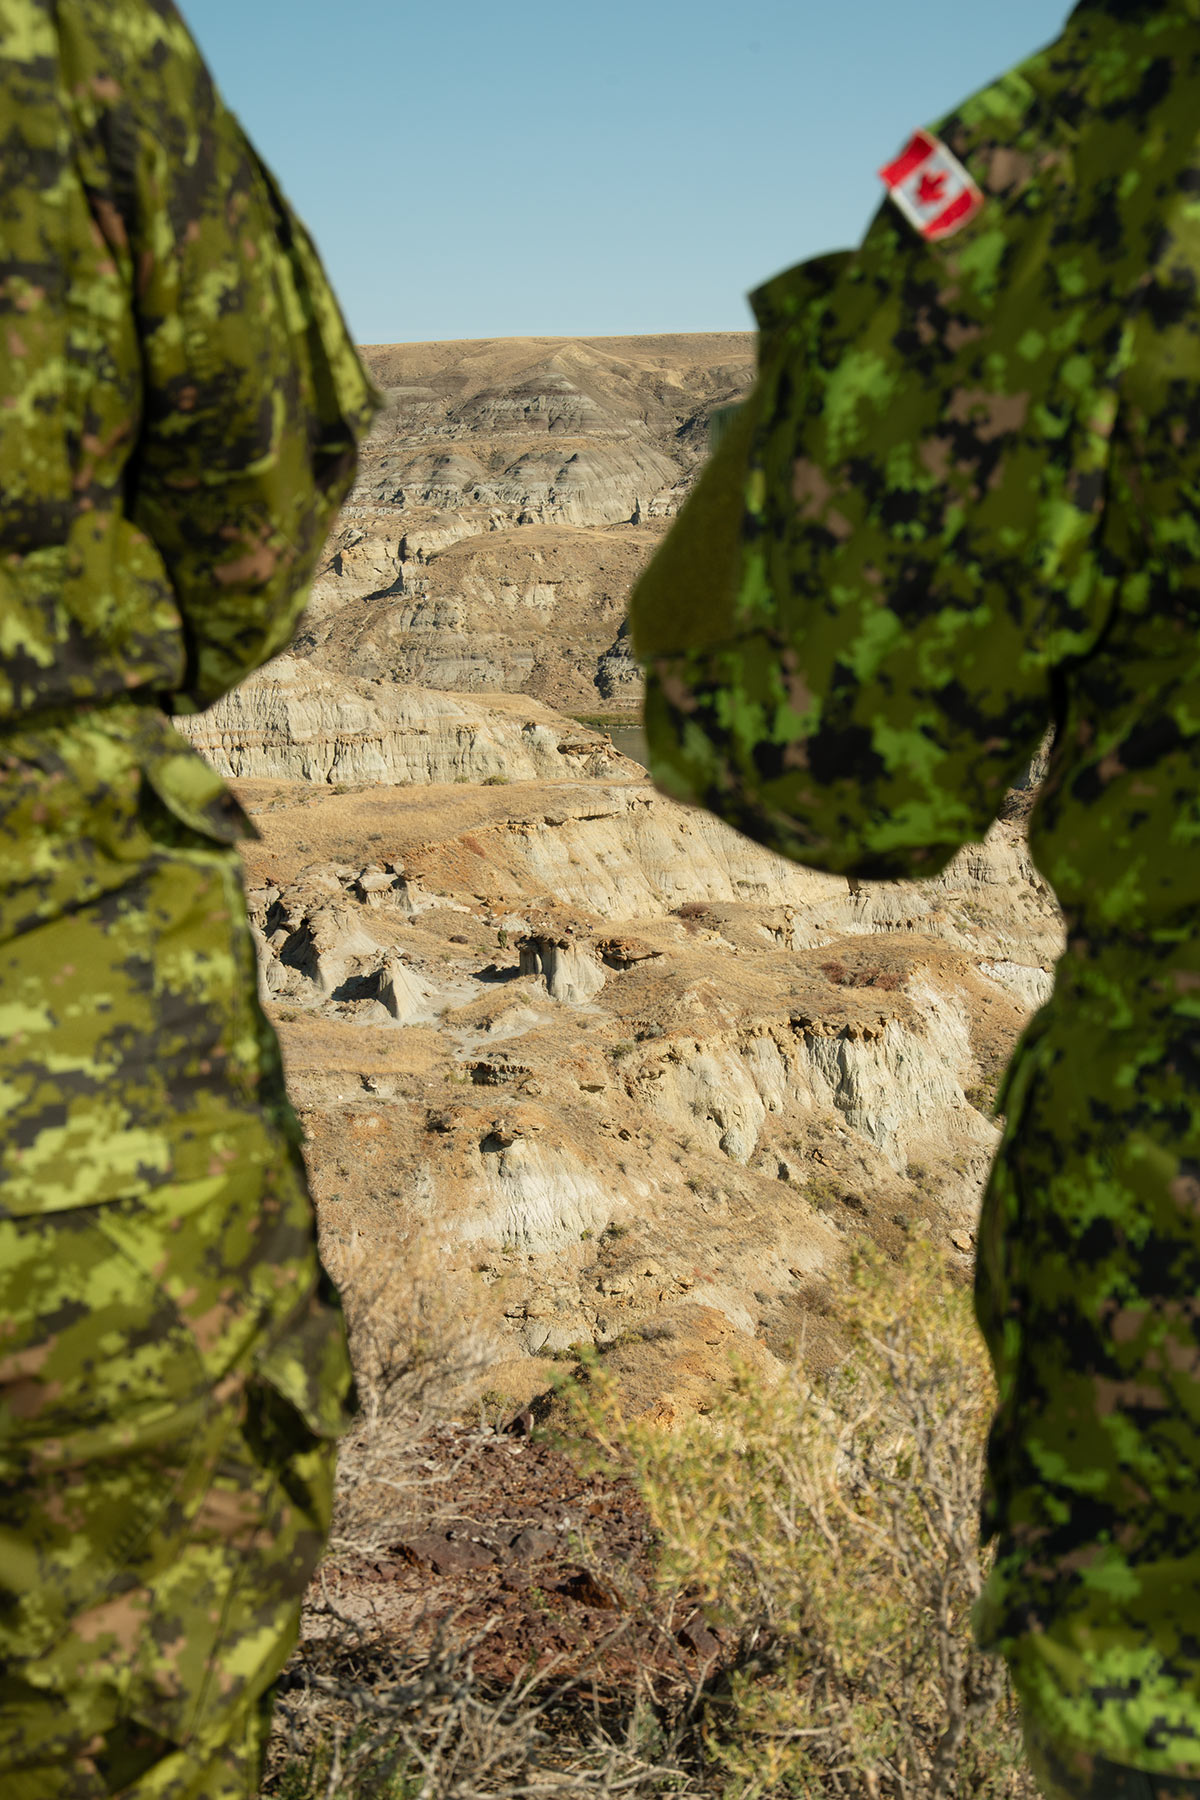 Photo of rocky beige landscape framed by the bodies of two military personnel wearing green camo. A small Canadian flag patch is seen on the arm of the person on the right.